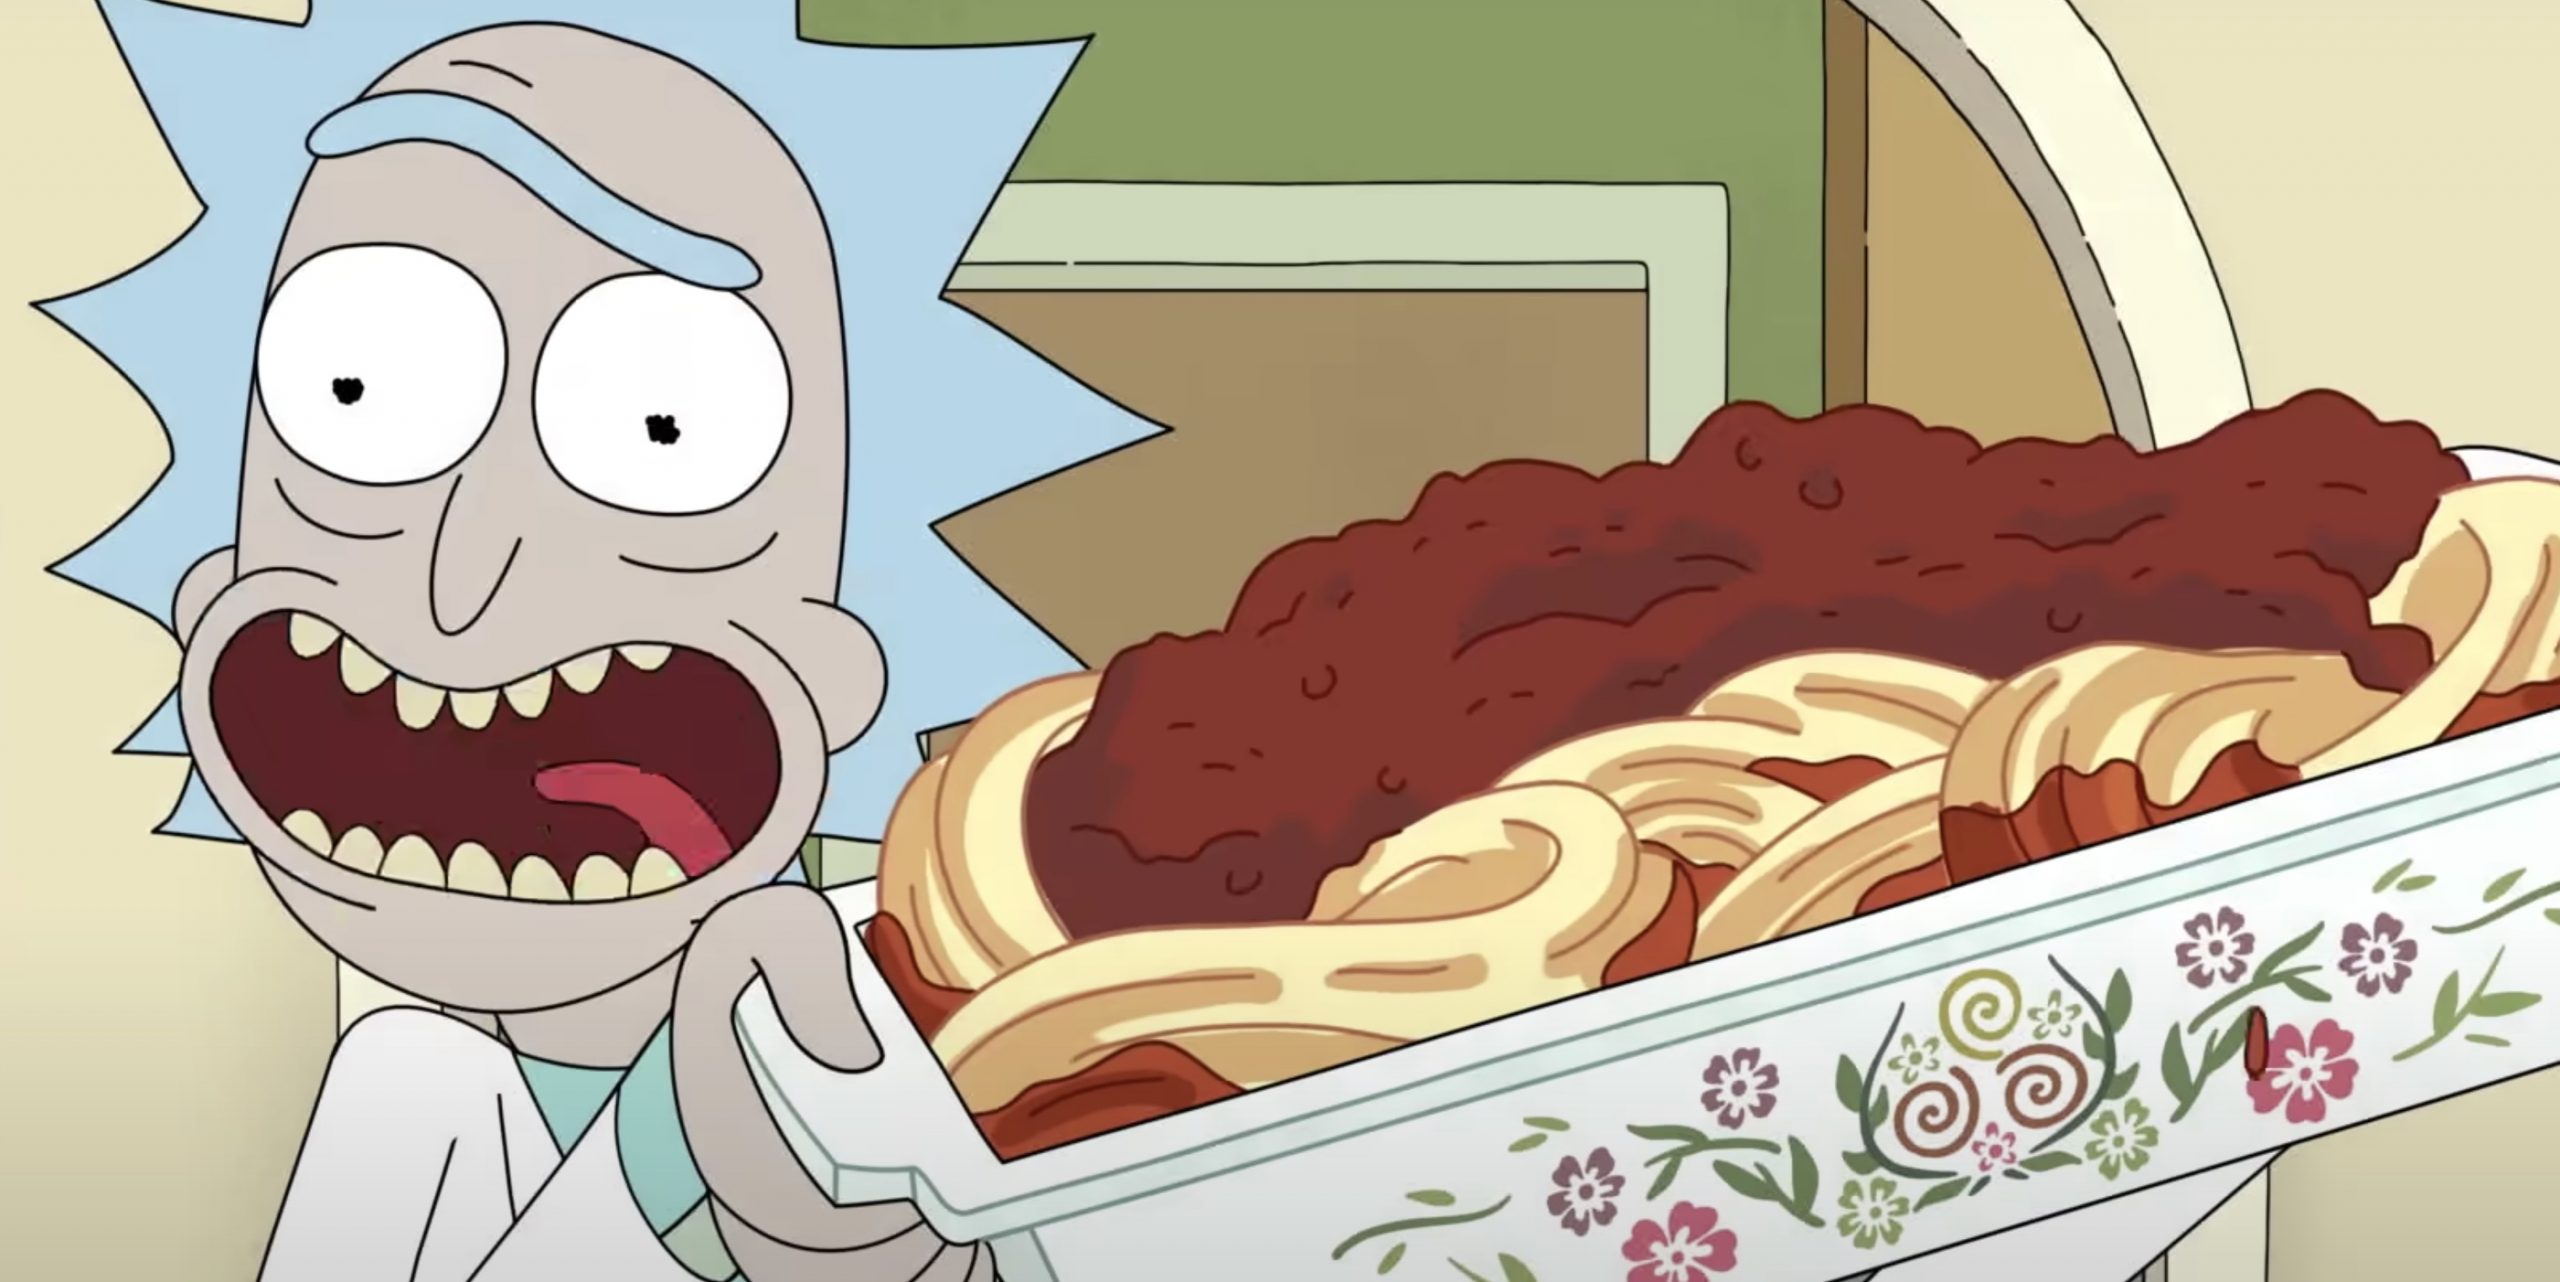 Rick and Morty Season 7 Episode 1 release date